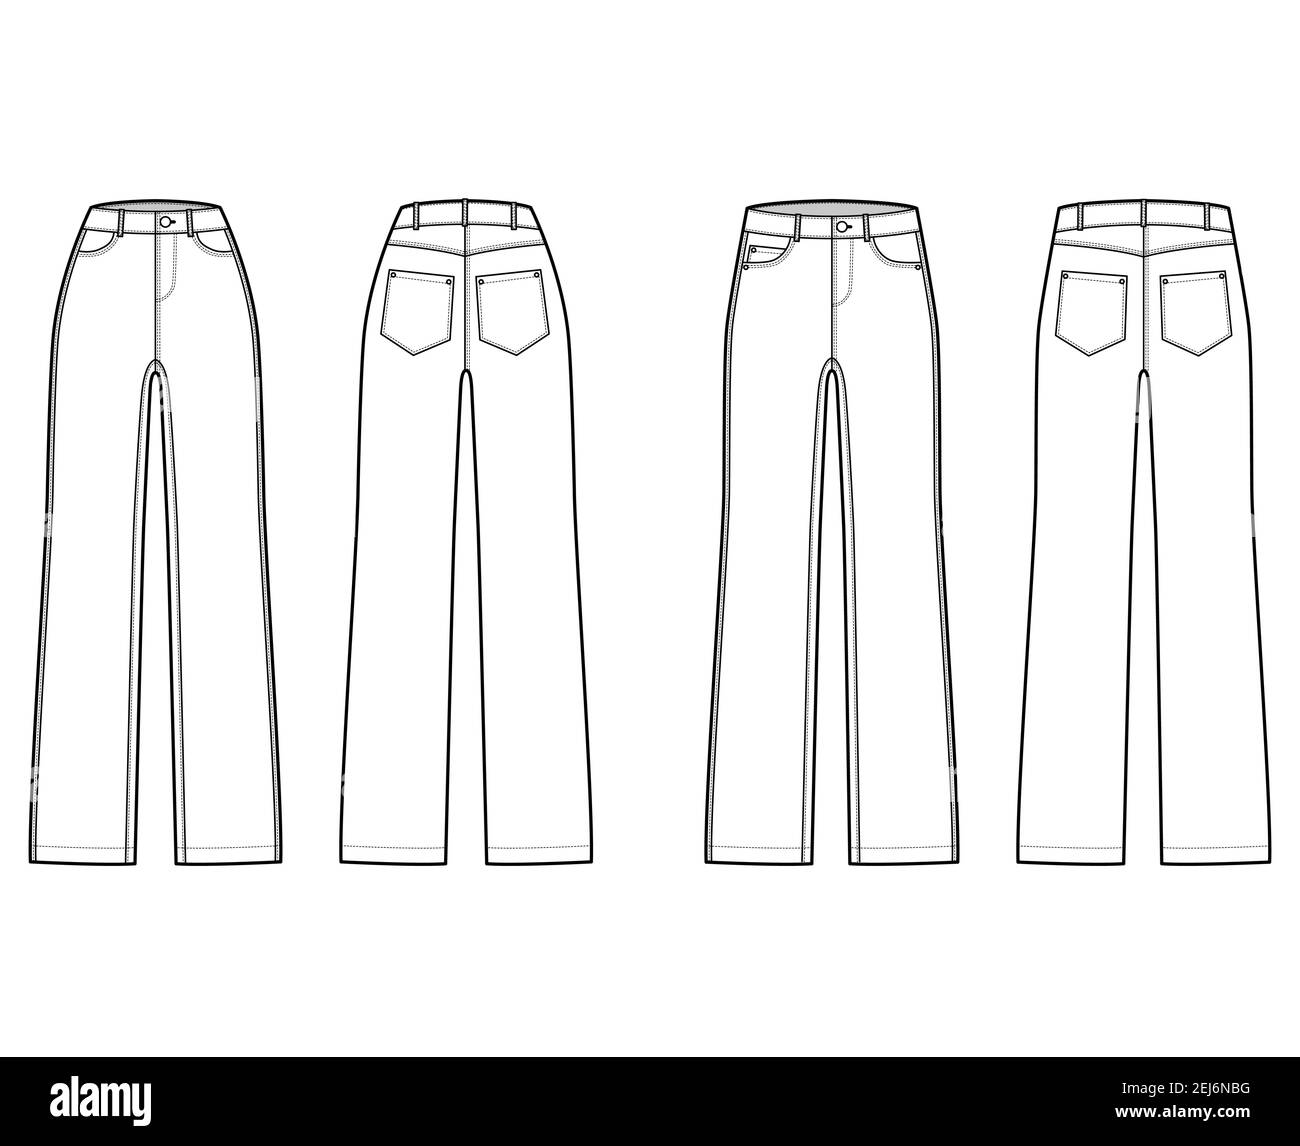 Jeans sketch Cut Out Stock Images & Pictures - Page 2 - Alamy